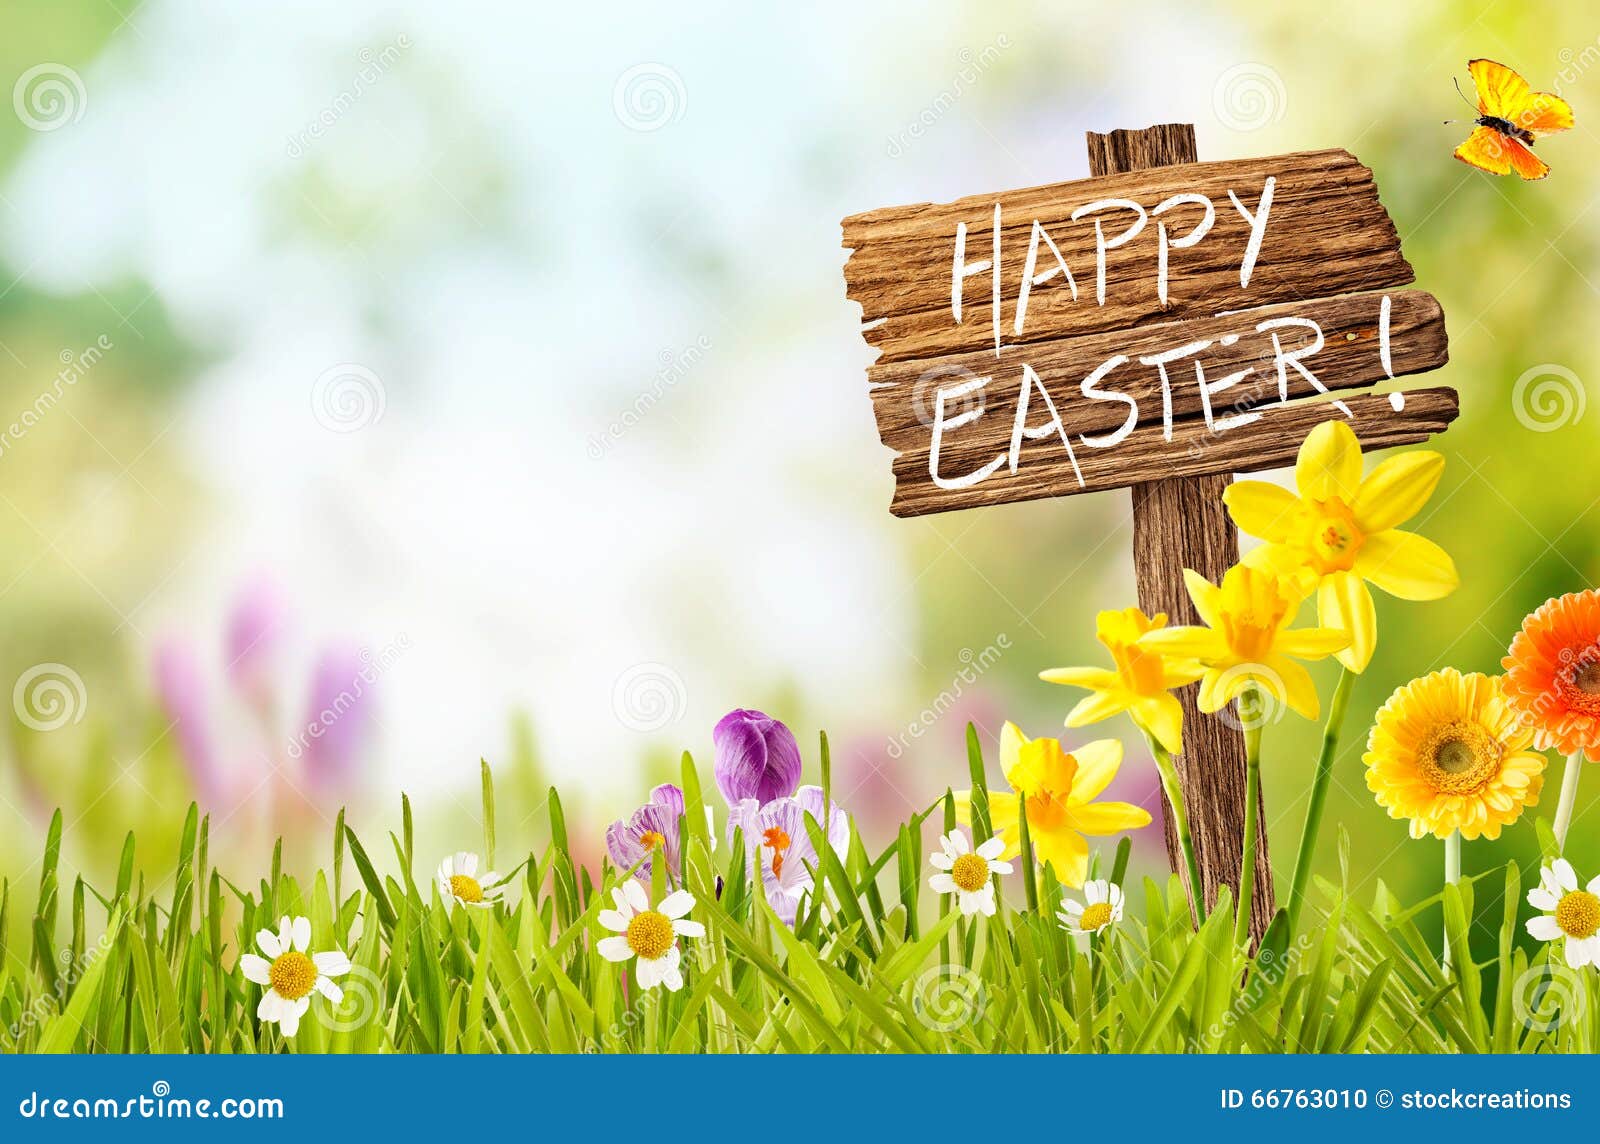 joyful spring background for a happy easter